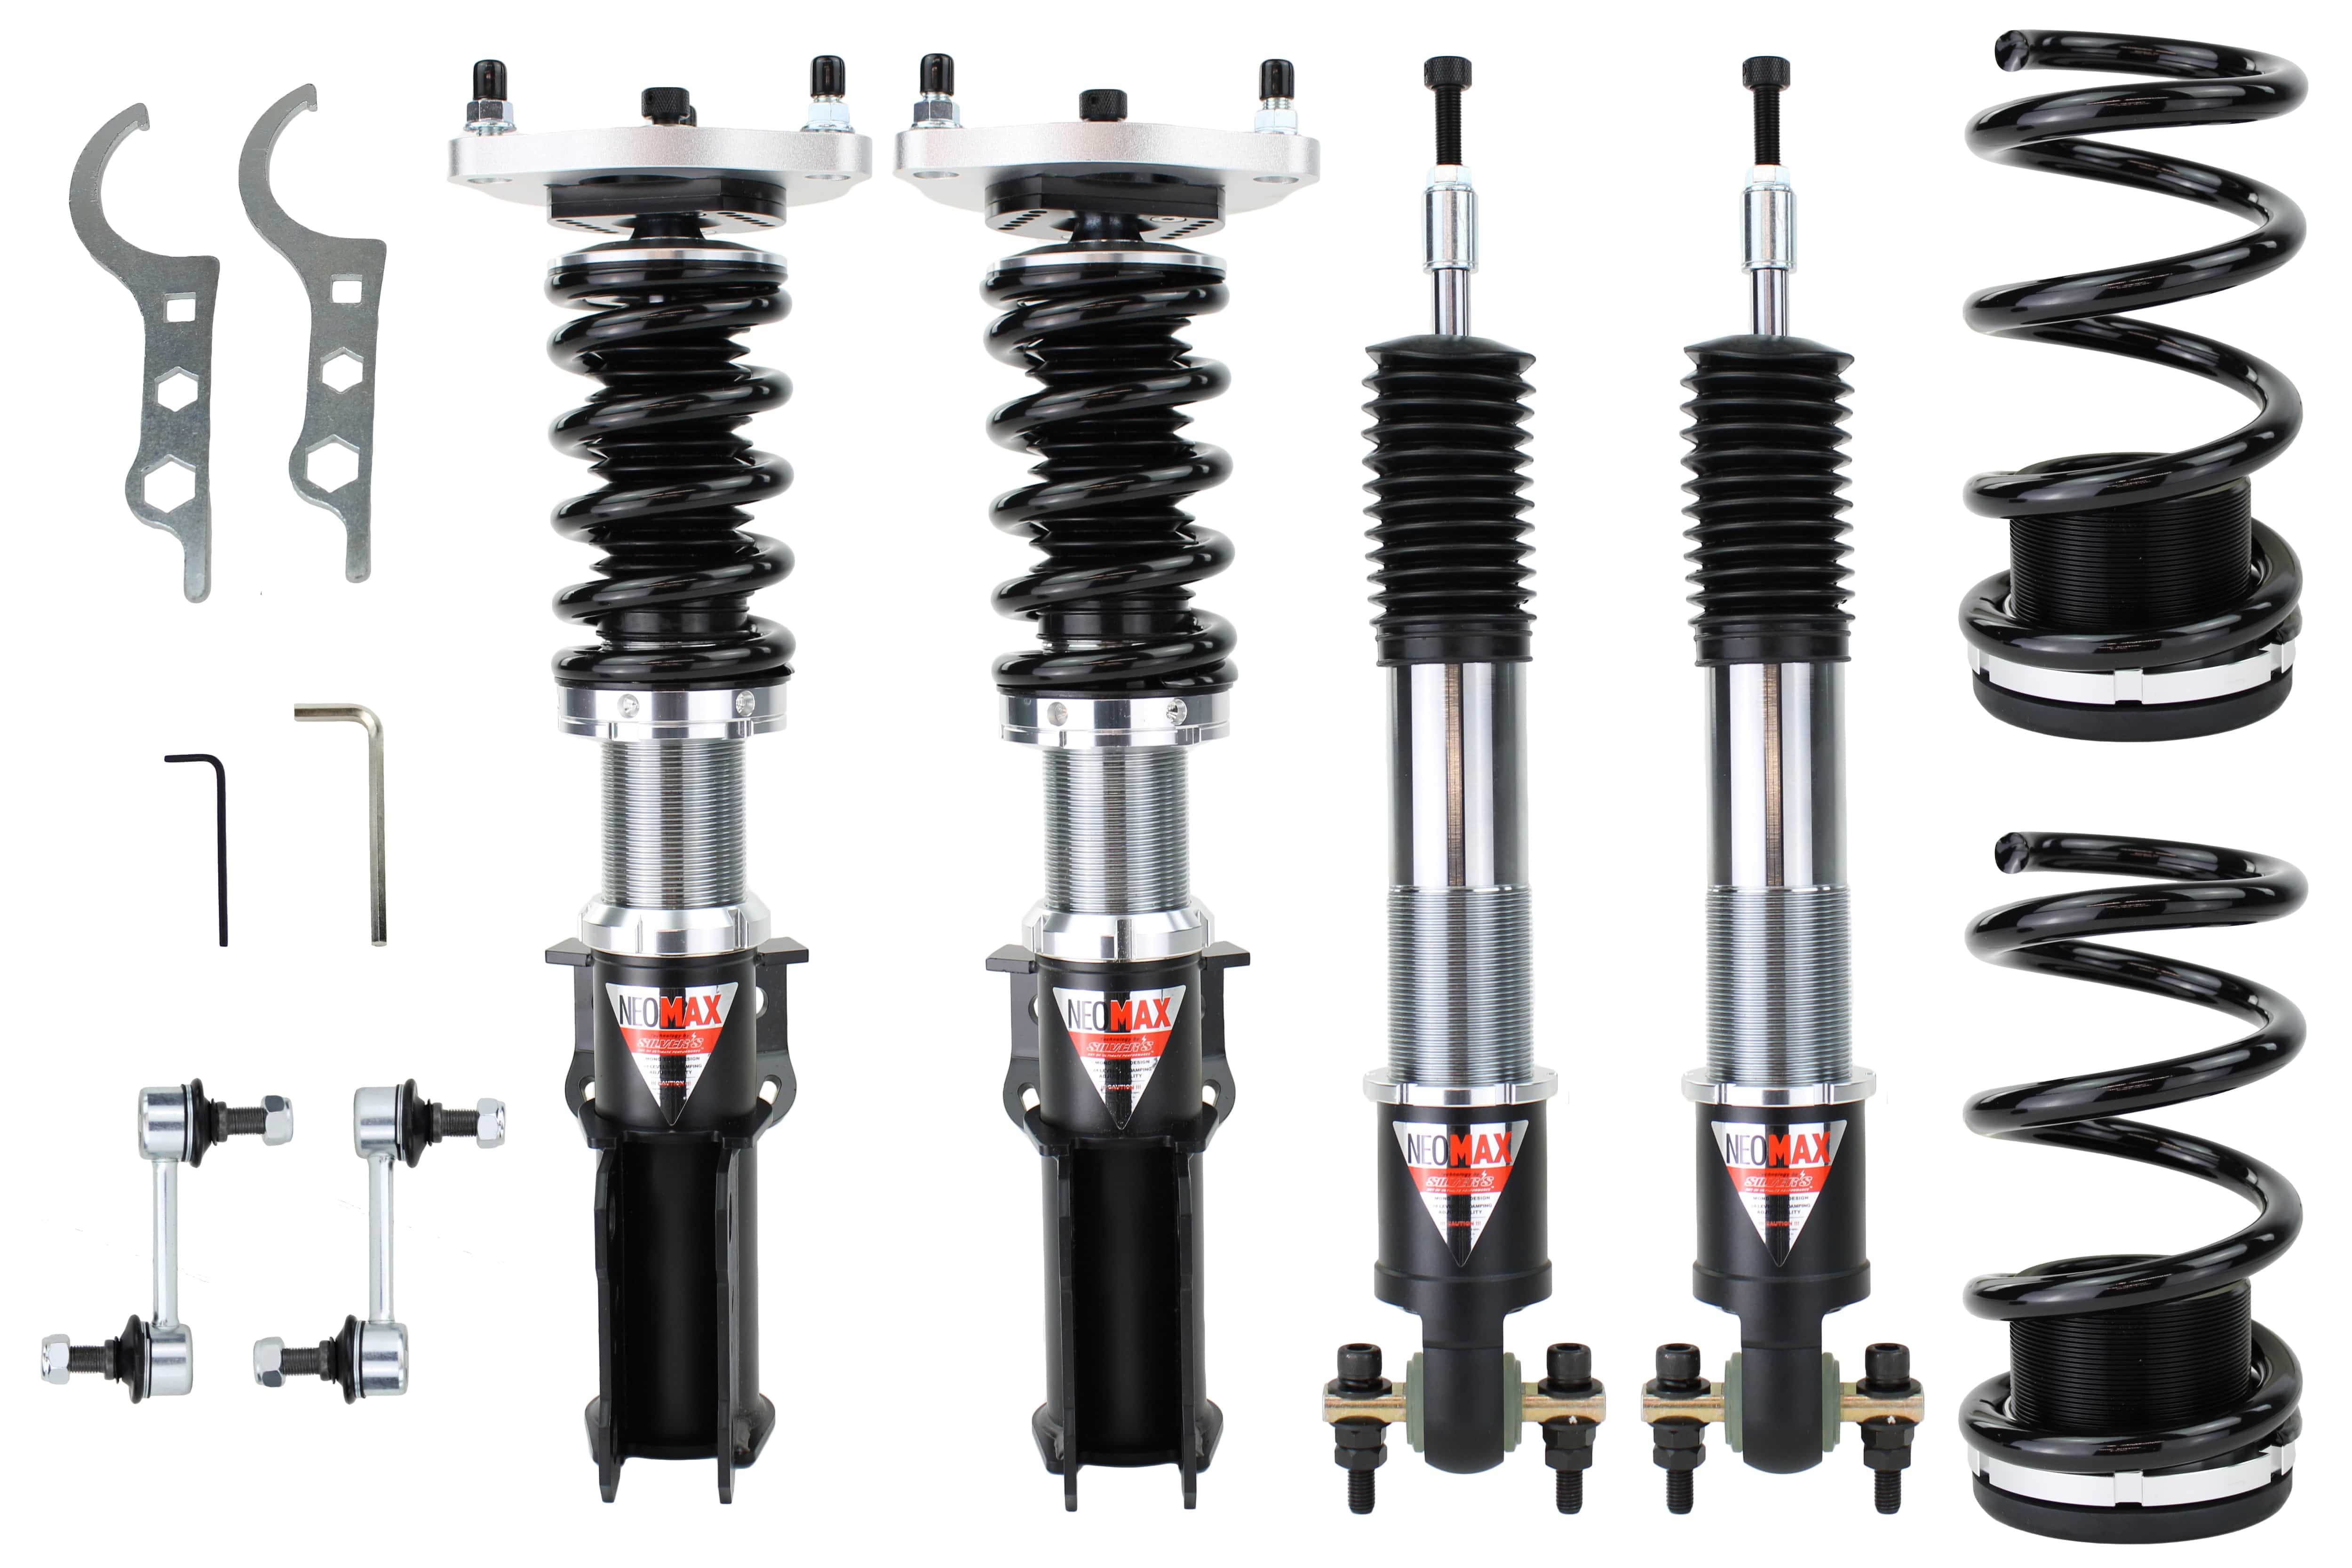 Silvers NEOMAX Coilovers for 2015+ Ford Mustang S550 GT V8